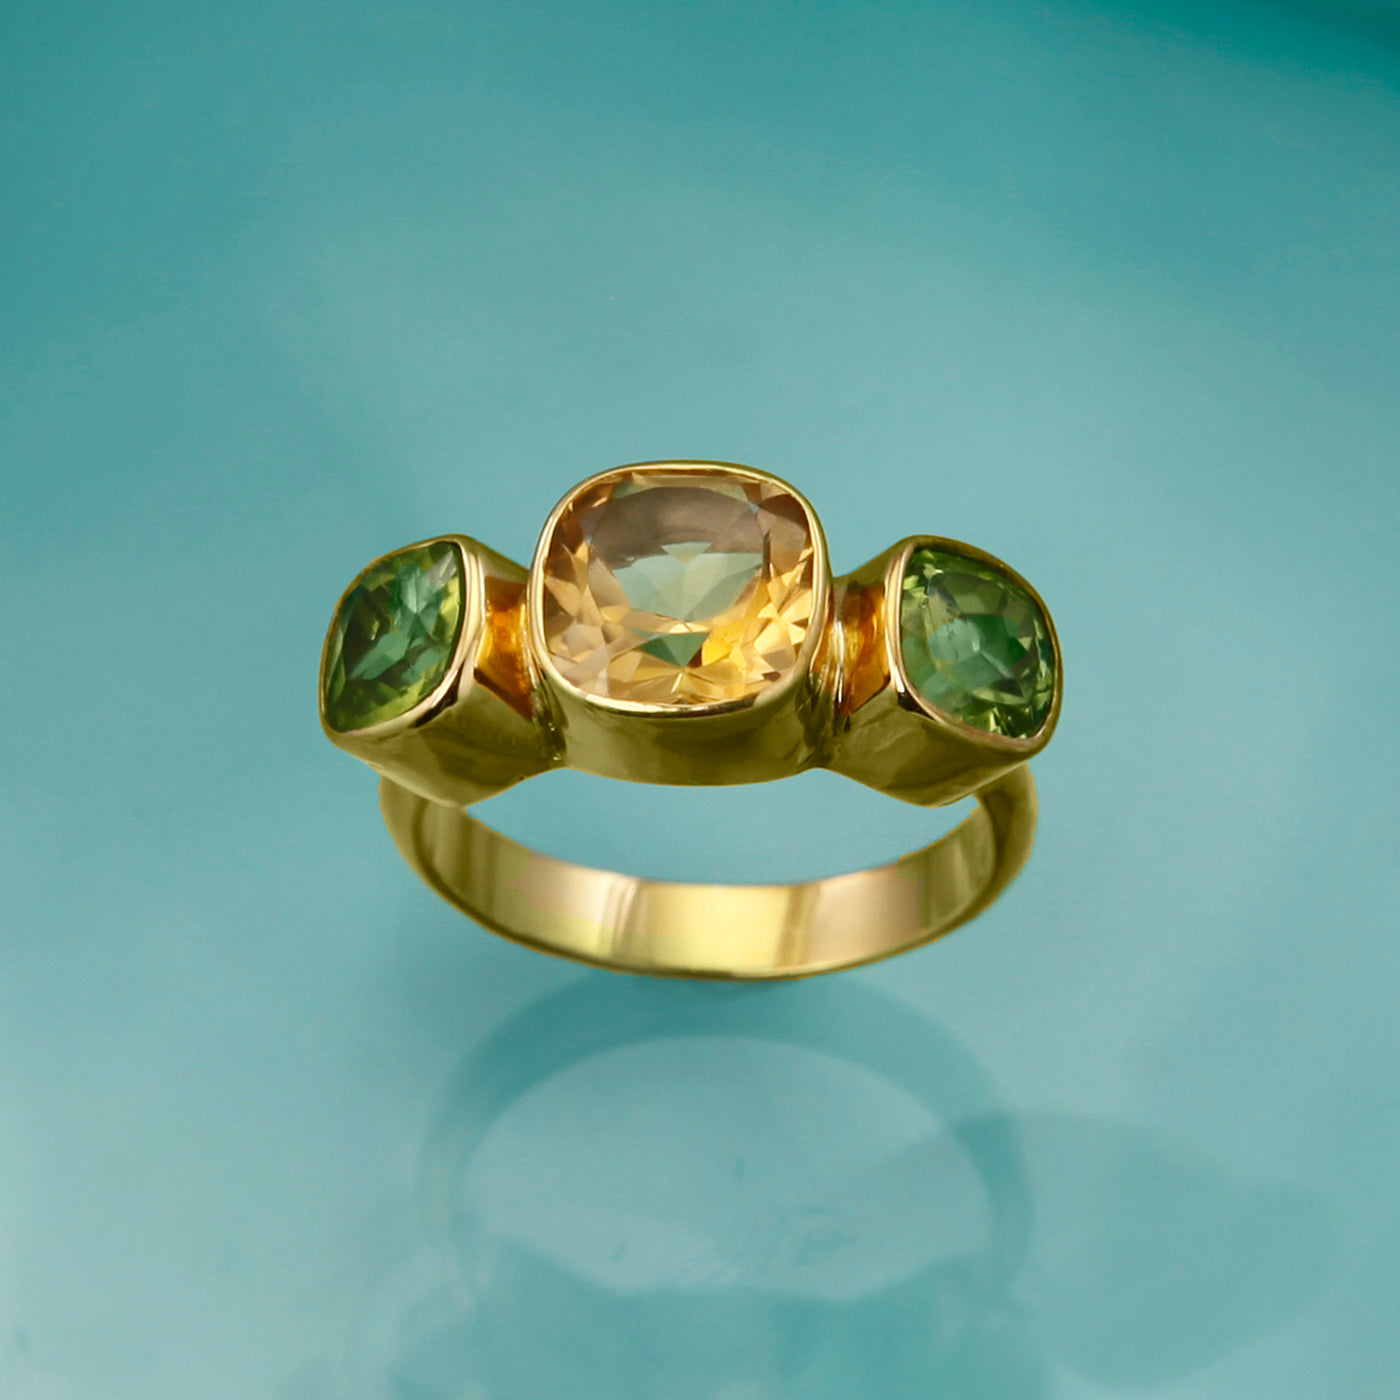 Gold Ring With Natural Citrine And Peridot